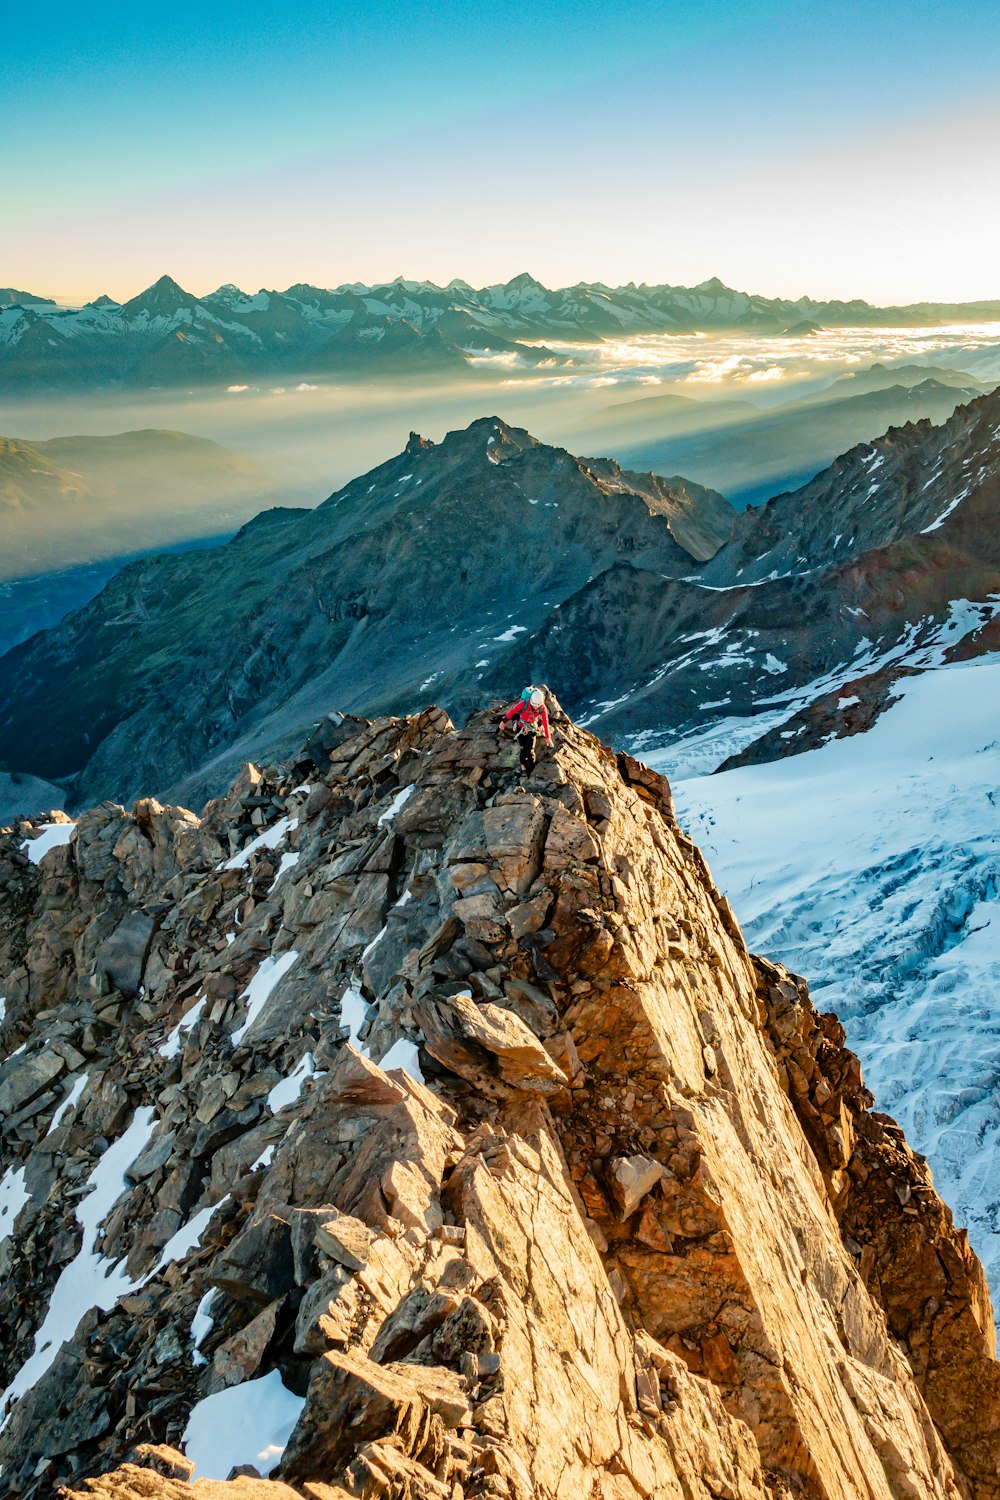 person in red jacket standing on rocky mountain during daytime